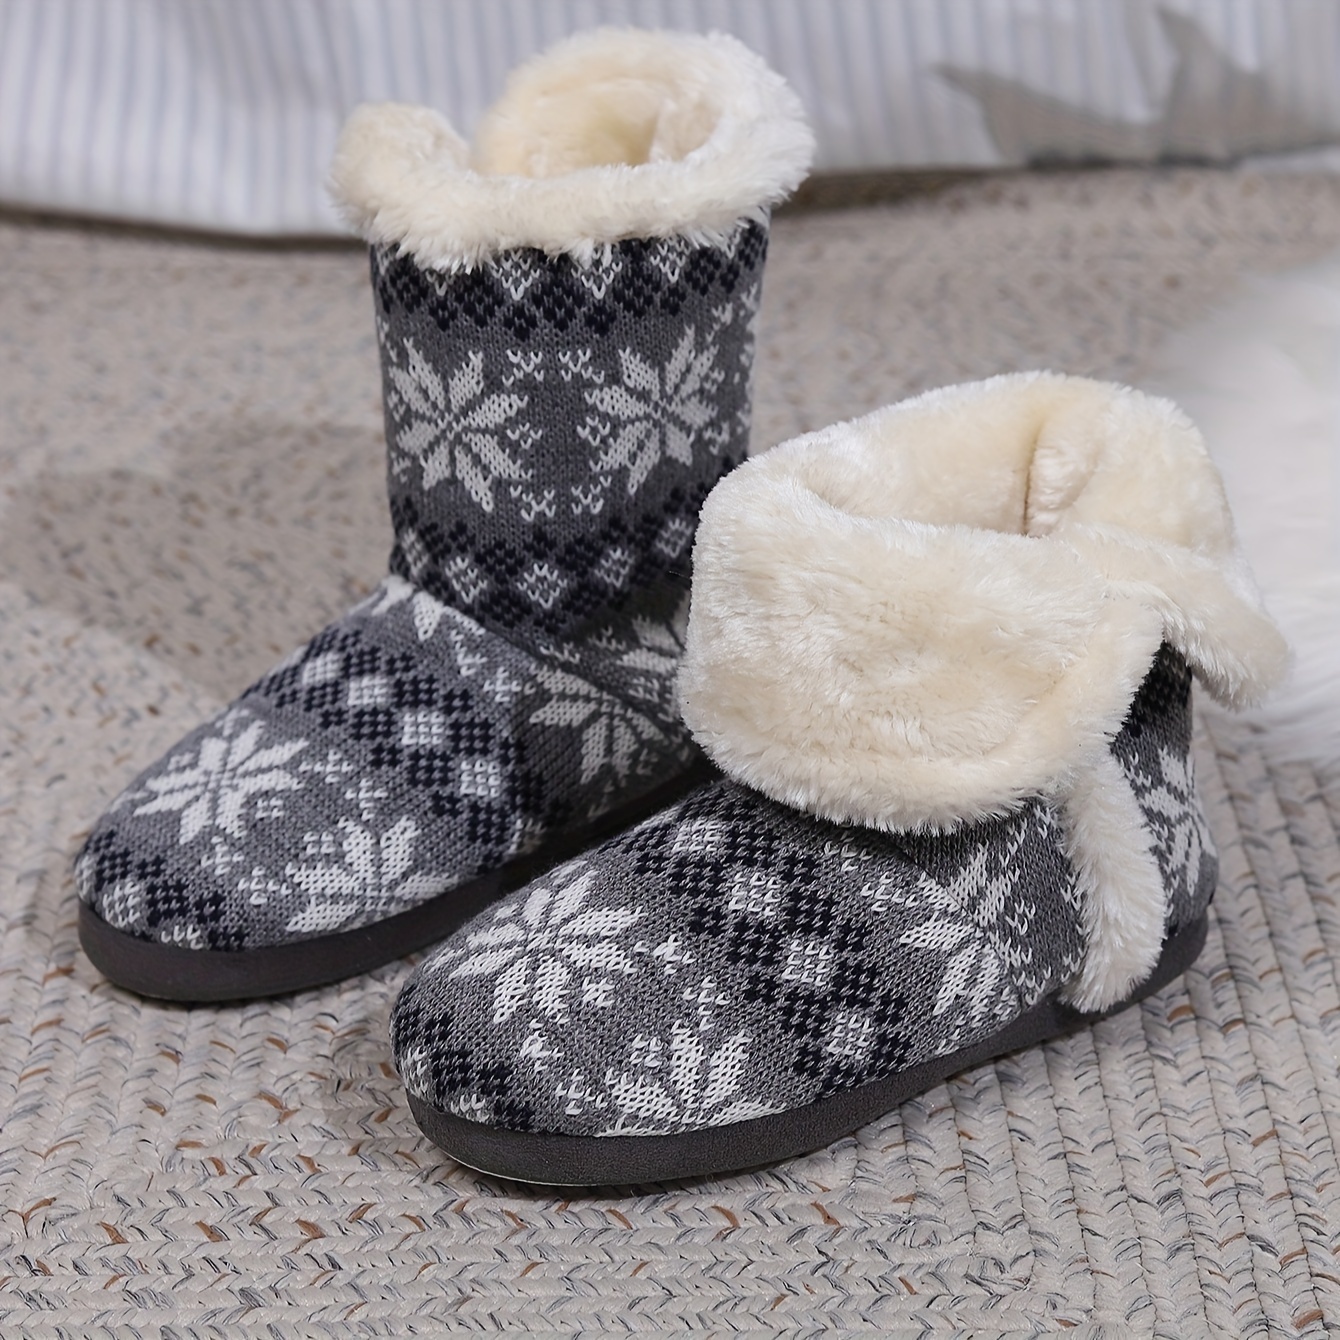 Winter Snowflake Patter Fleece Slipper Boots, Christmas Slip On Plush Lined  Flat Shoes, Cozy & Warm Short Boots